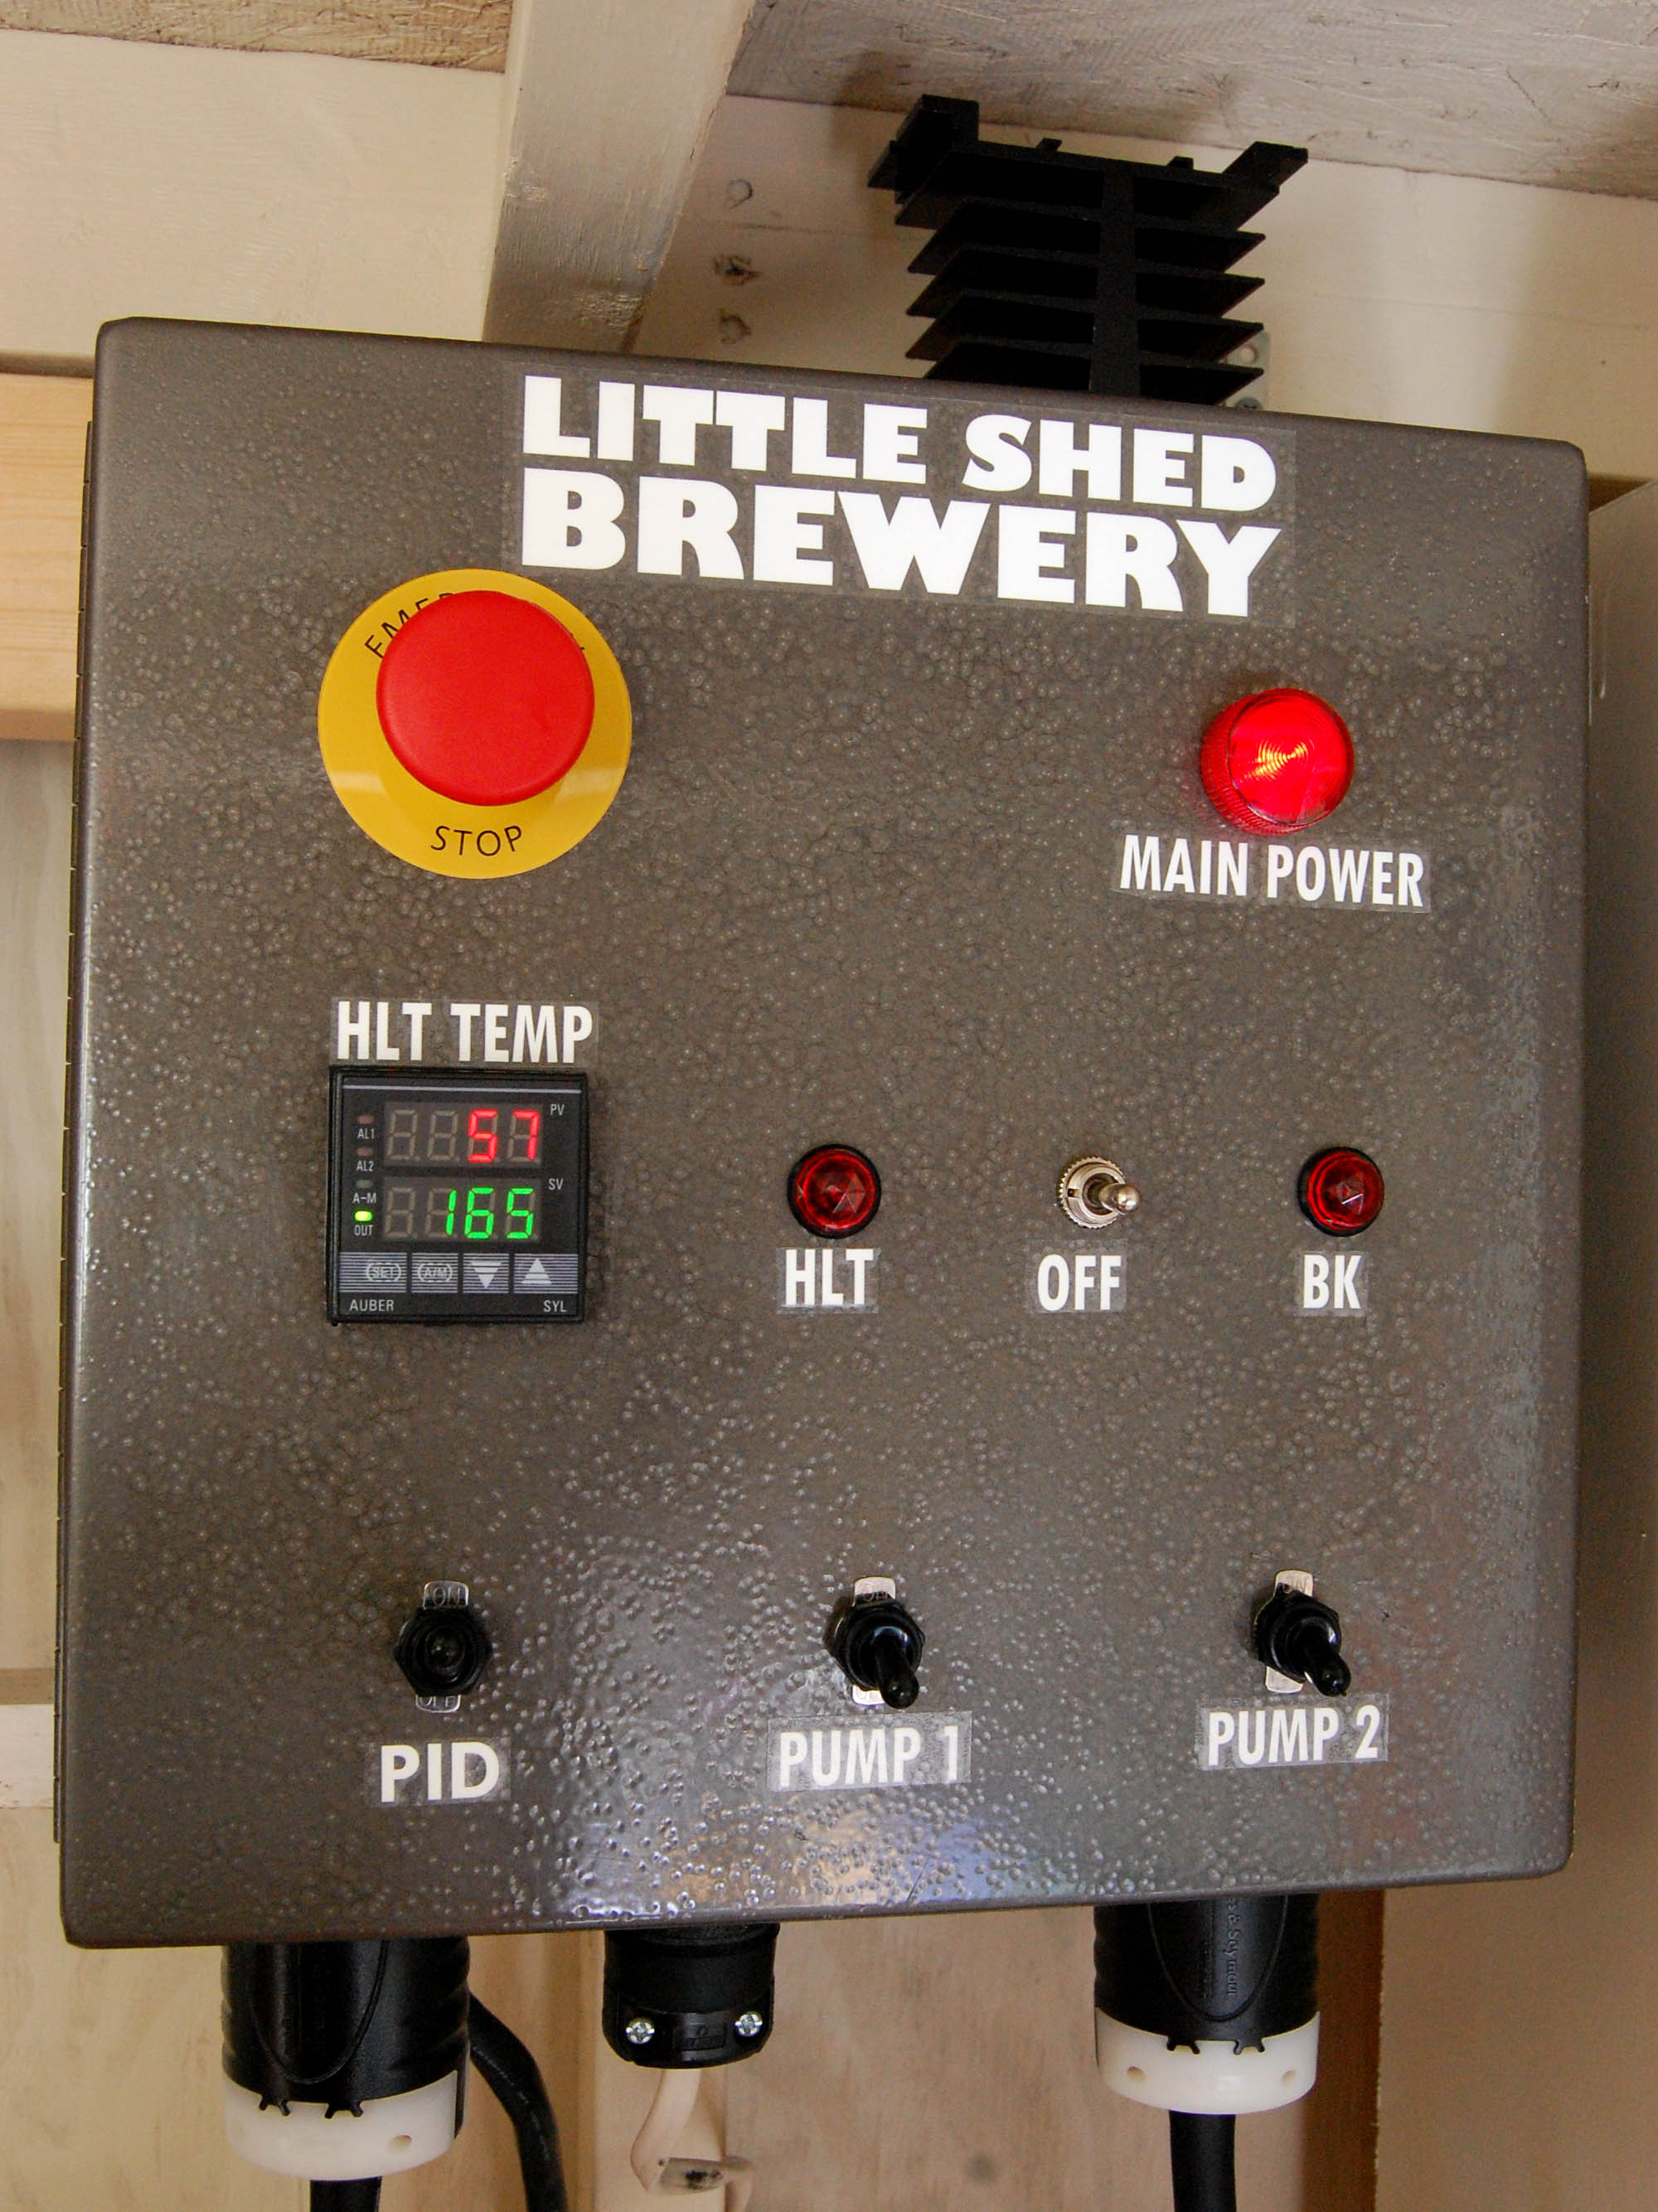 bigljd | Little Shed Brewery single element wiring diagram 